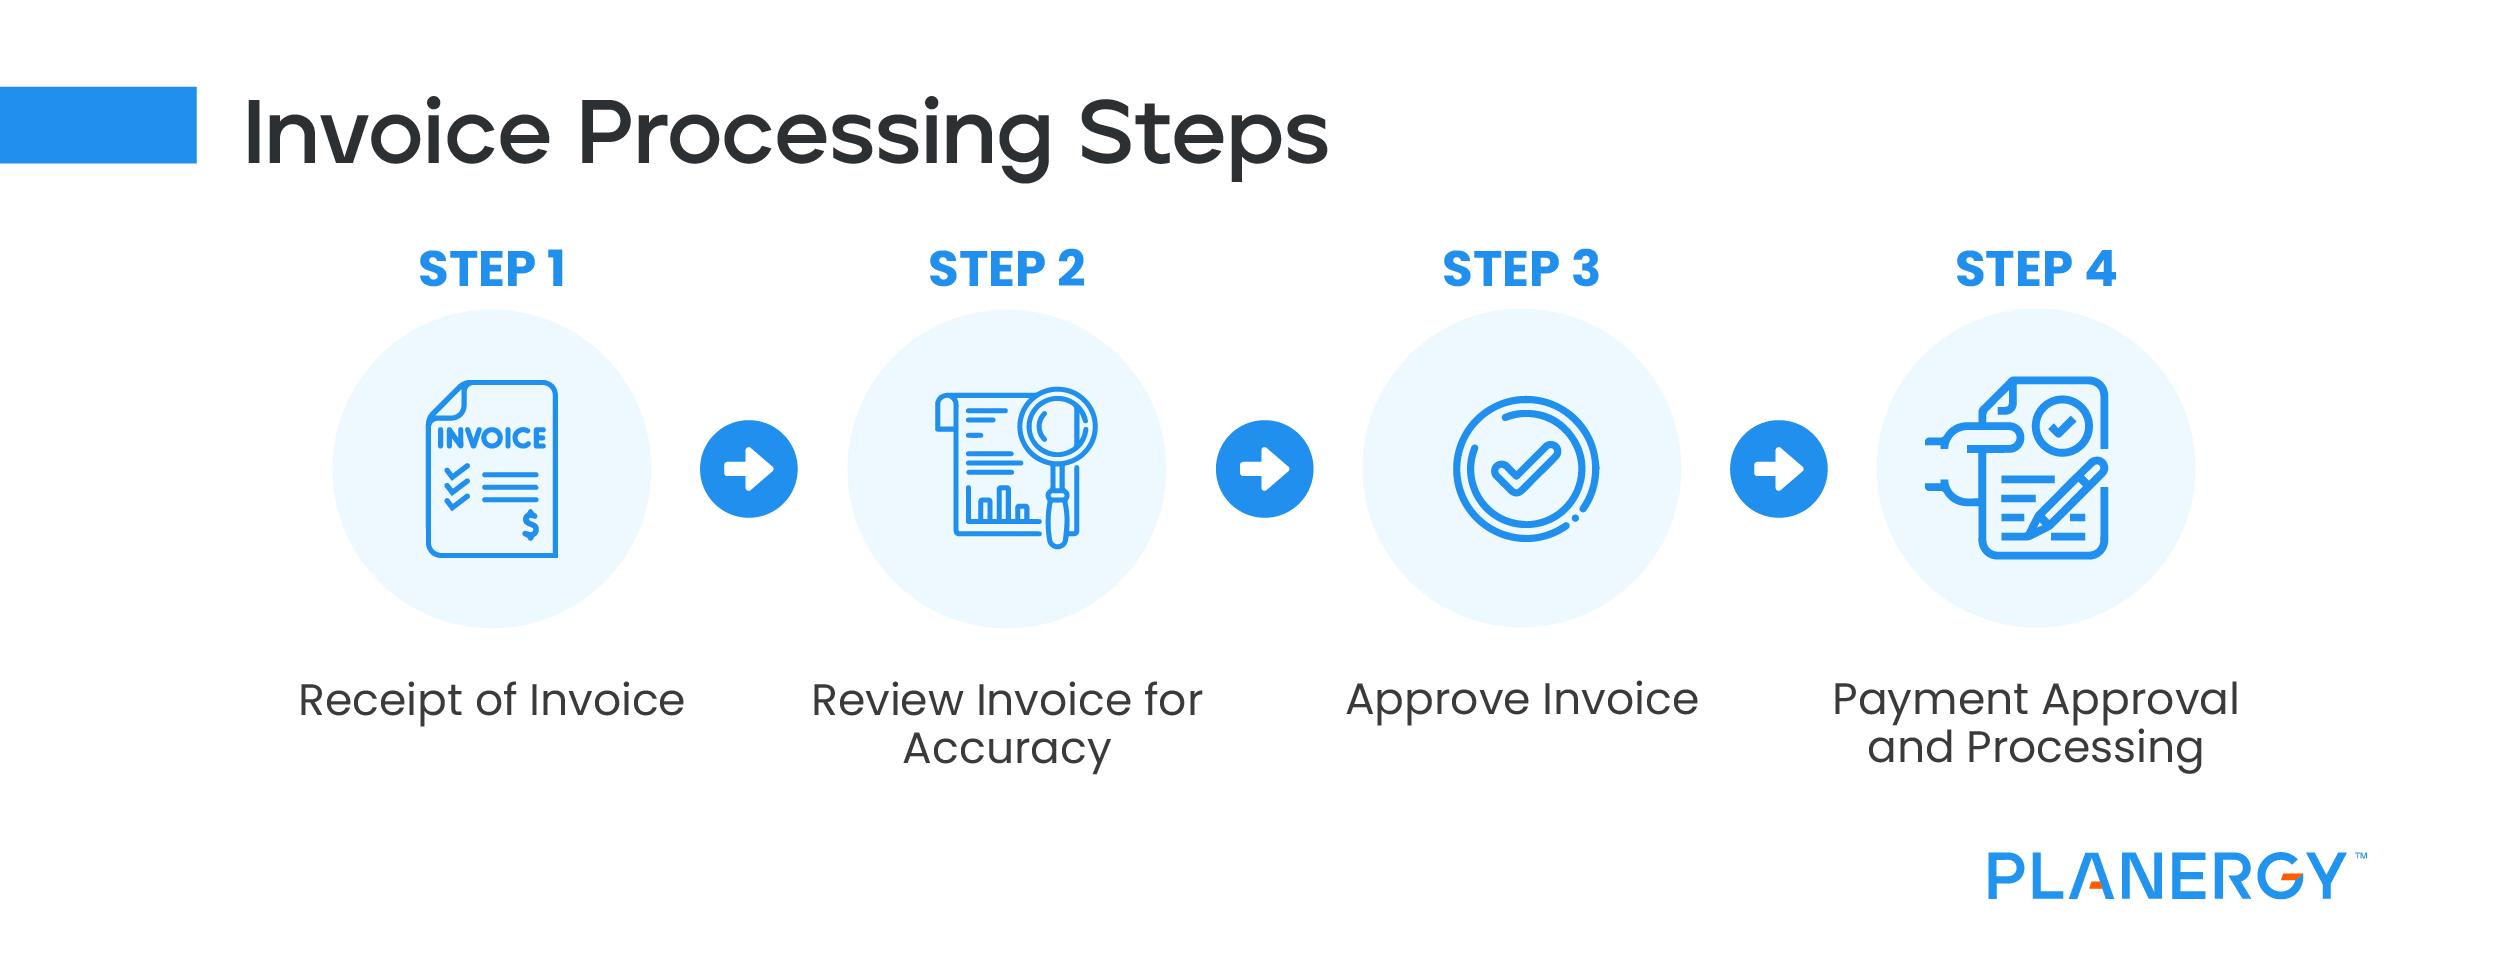 Invoice processing steps